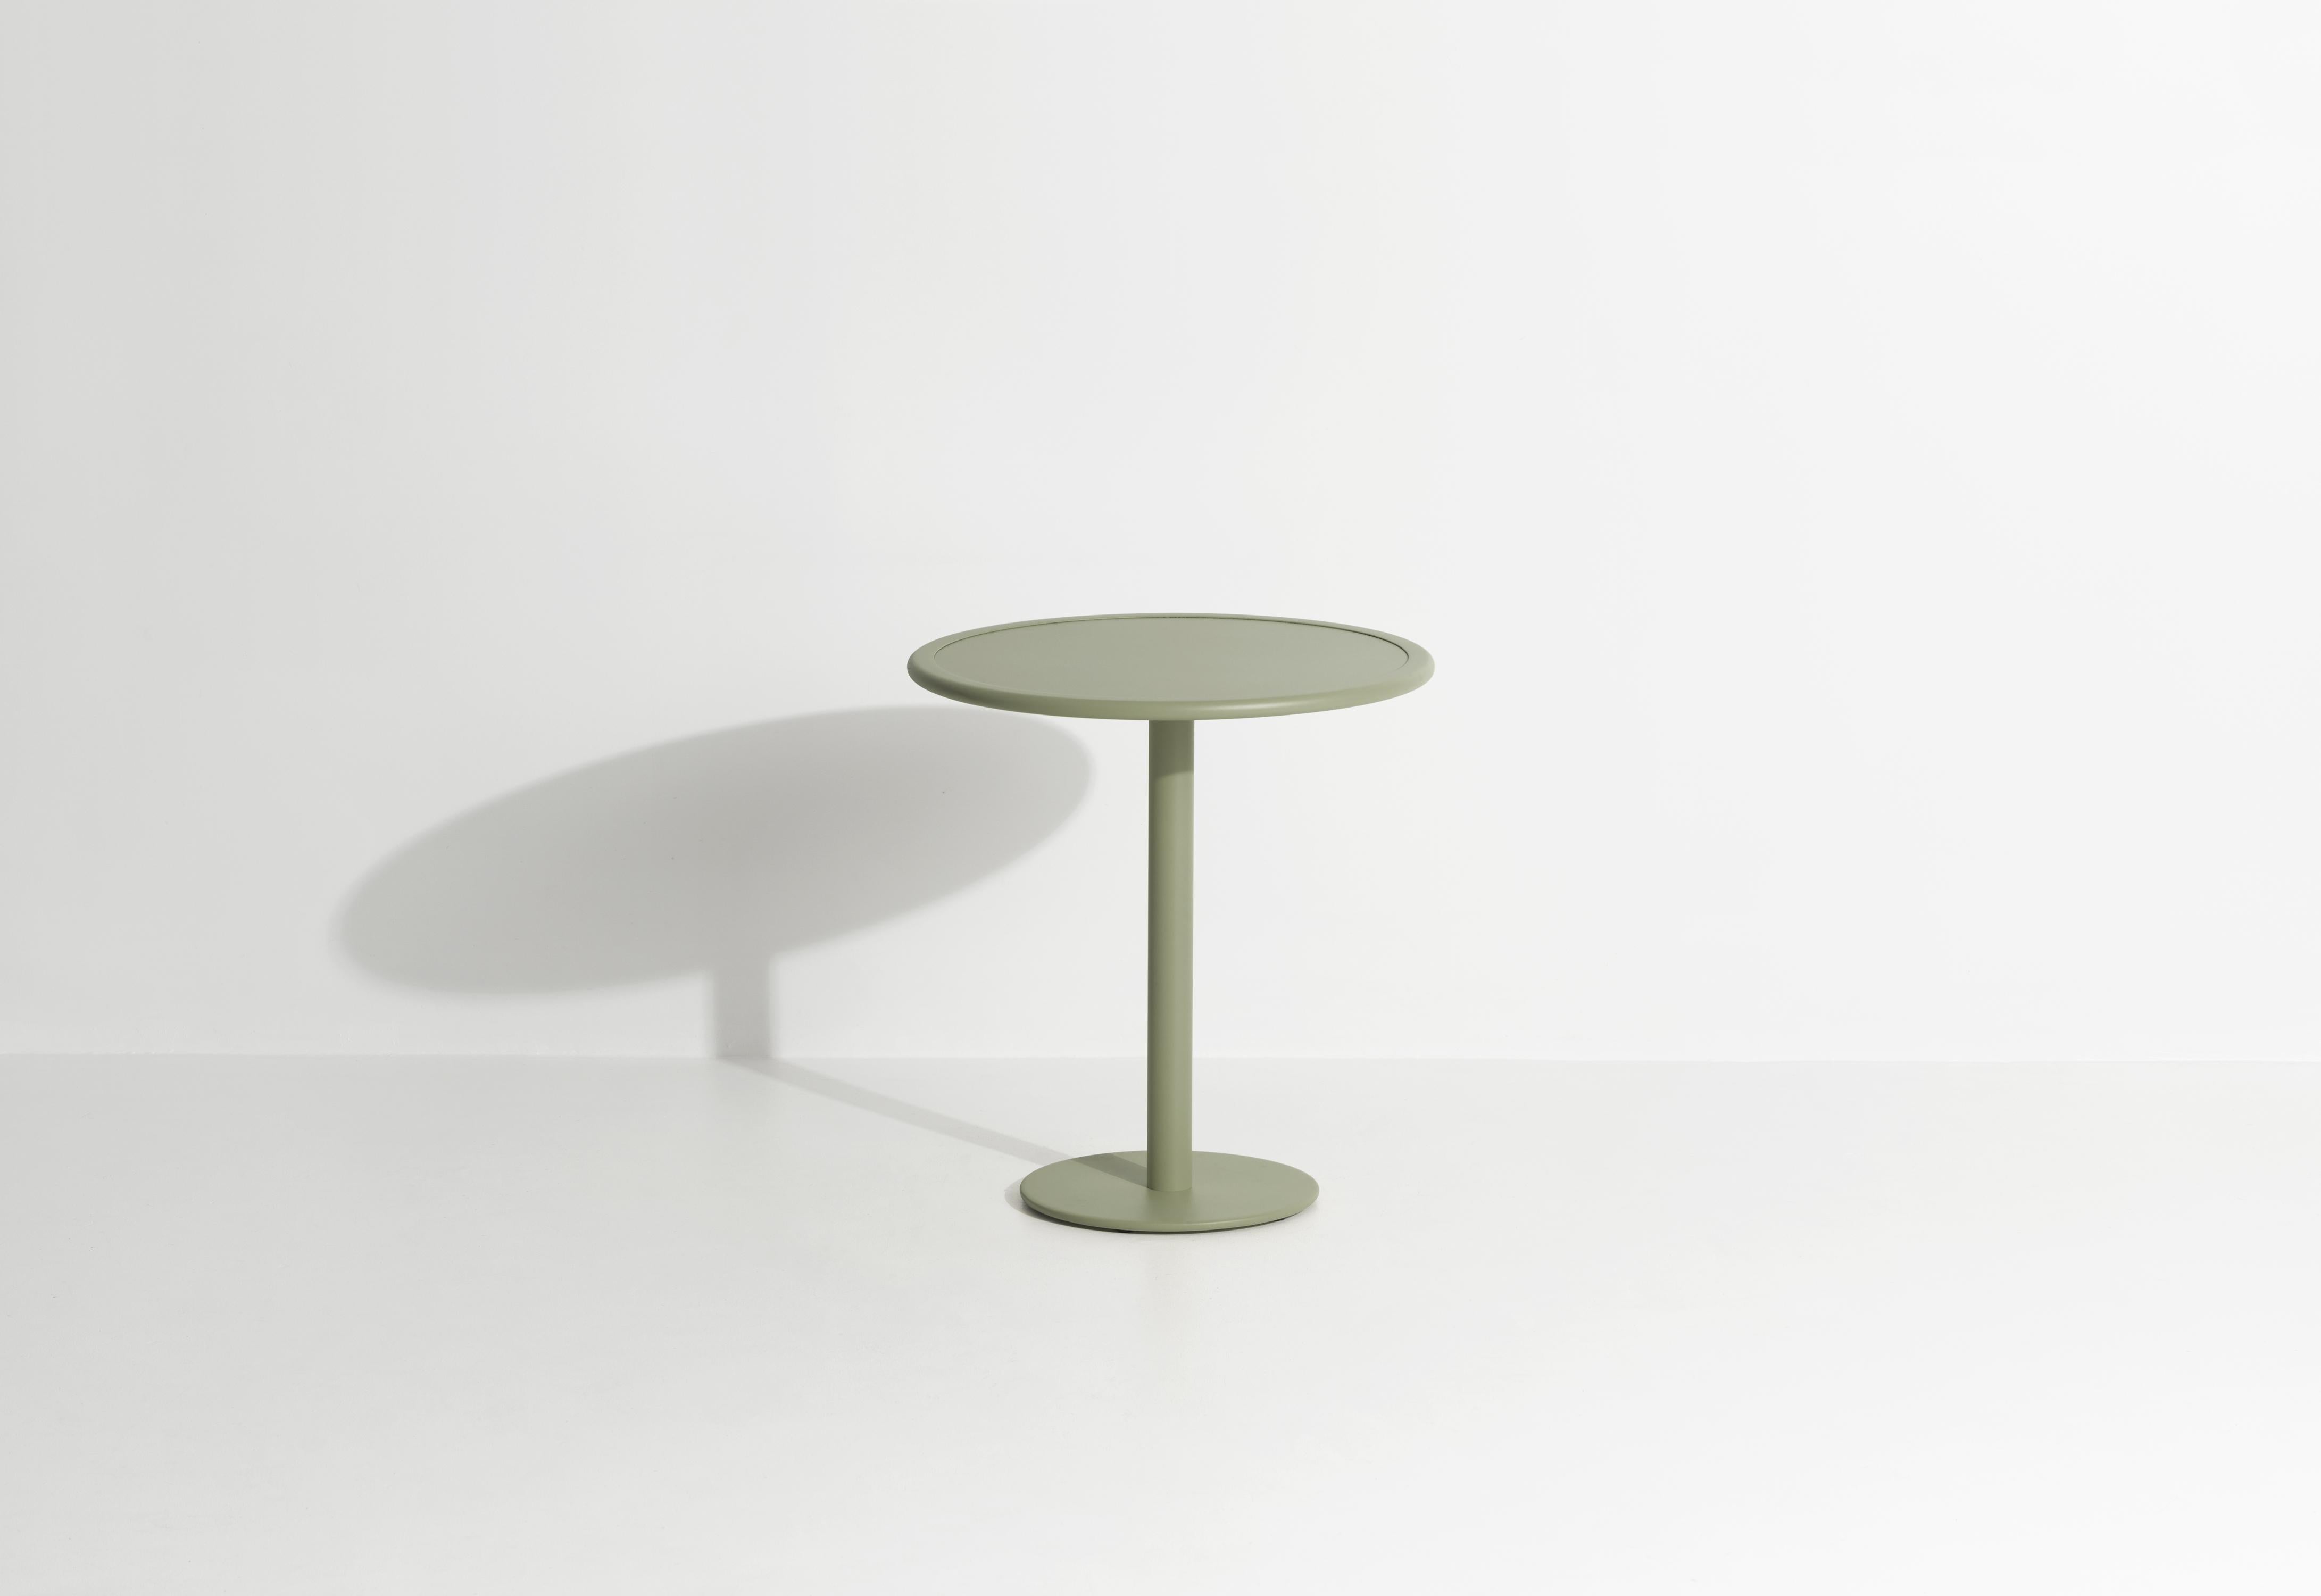 Petite Friture Week-End Bistro Round Dining Table in Jade Green Aluminium by Studio BrichetZiegler, 2017

The week-end collection is a full range of outdoor furniture, in aluminium grained epoxy paint, matt finish, that includes 18 functions and 8